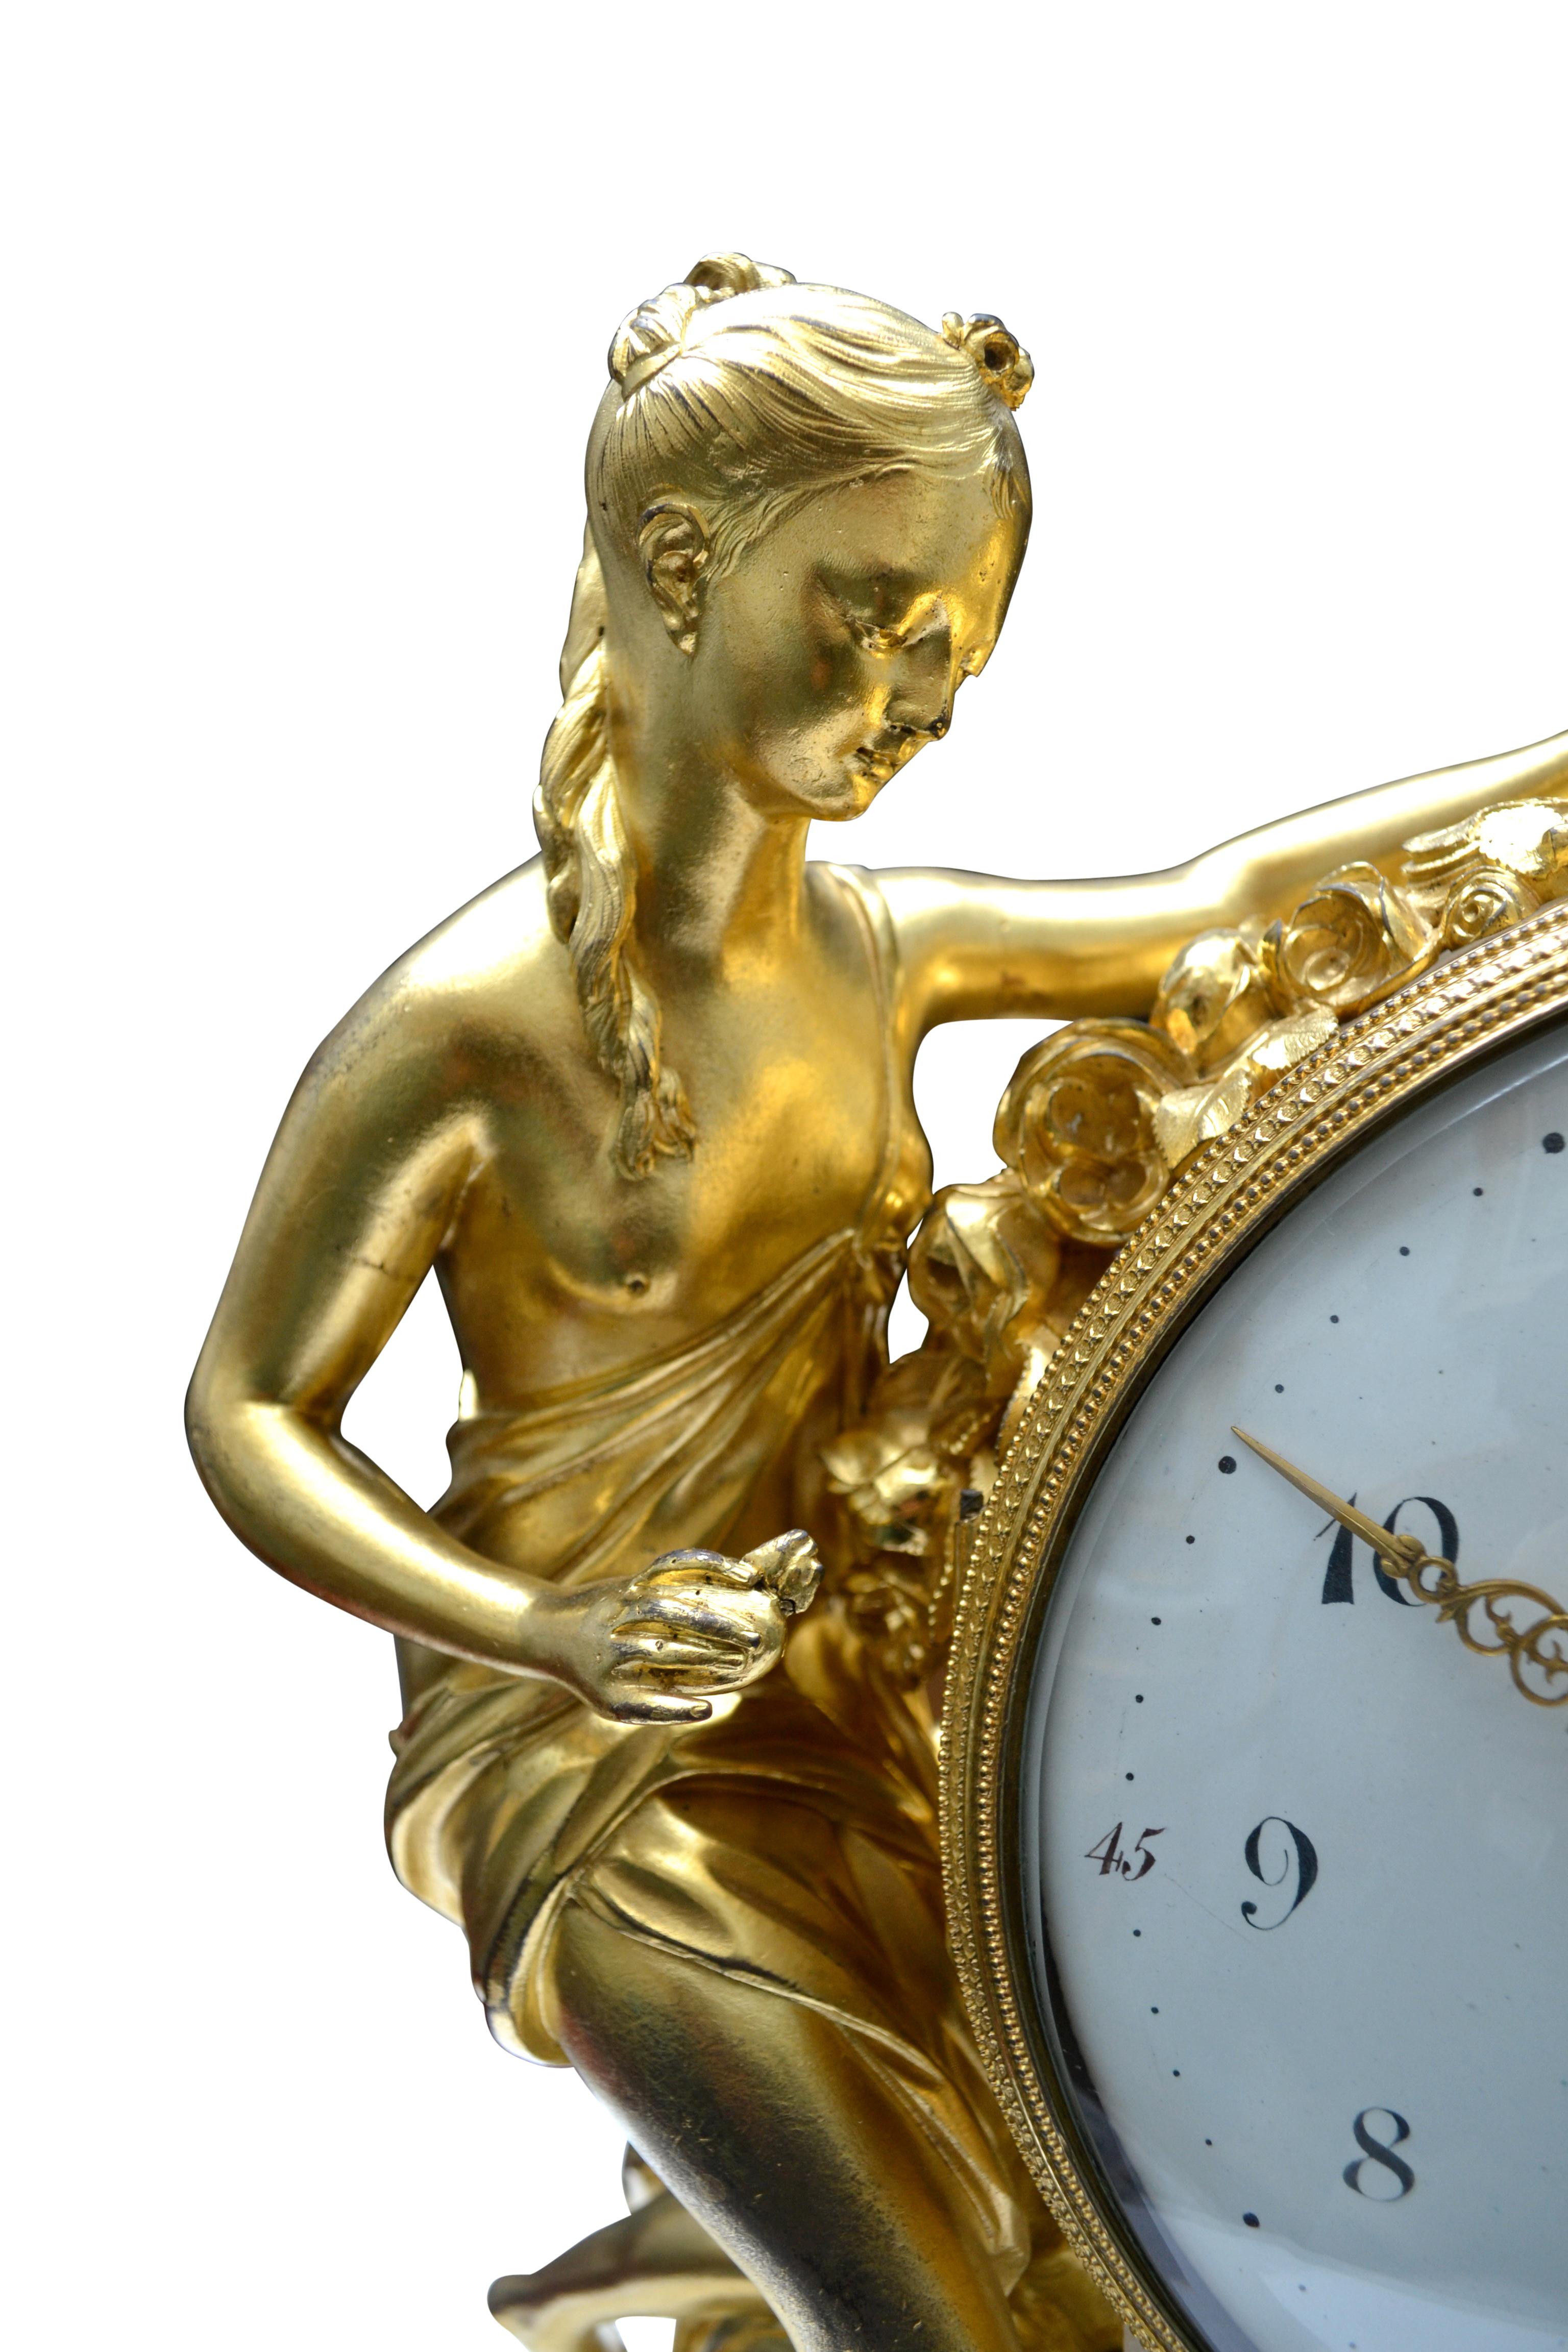 Louis XVI Allegorical Figurative Clock Depicting Venus Being Crowned by Amour For Sale 3